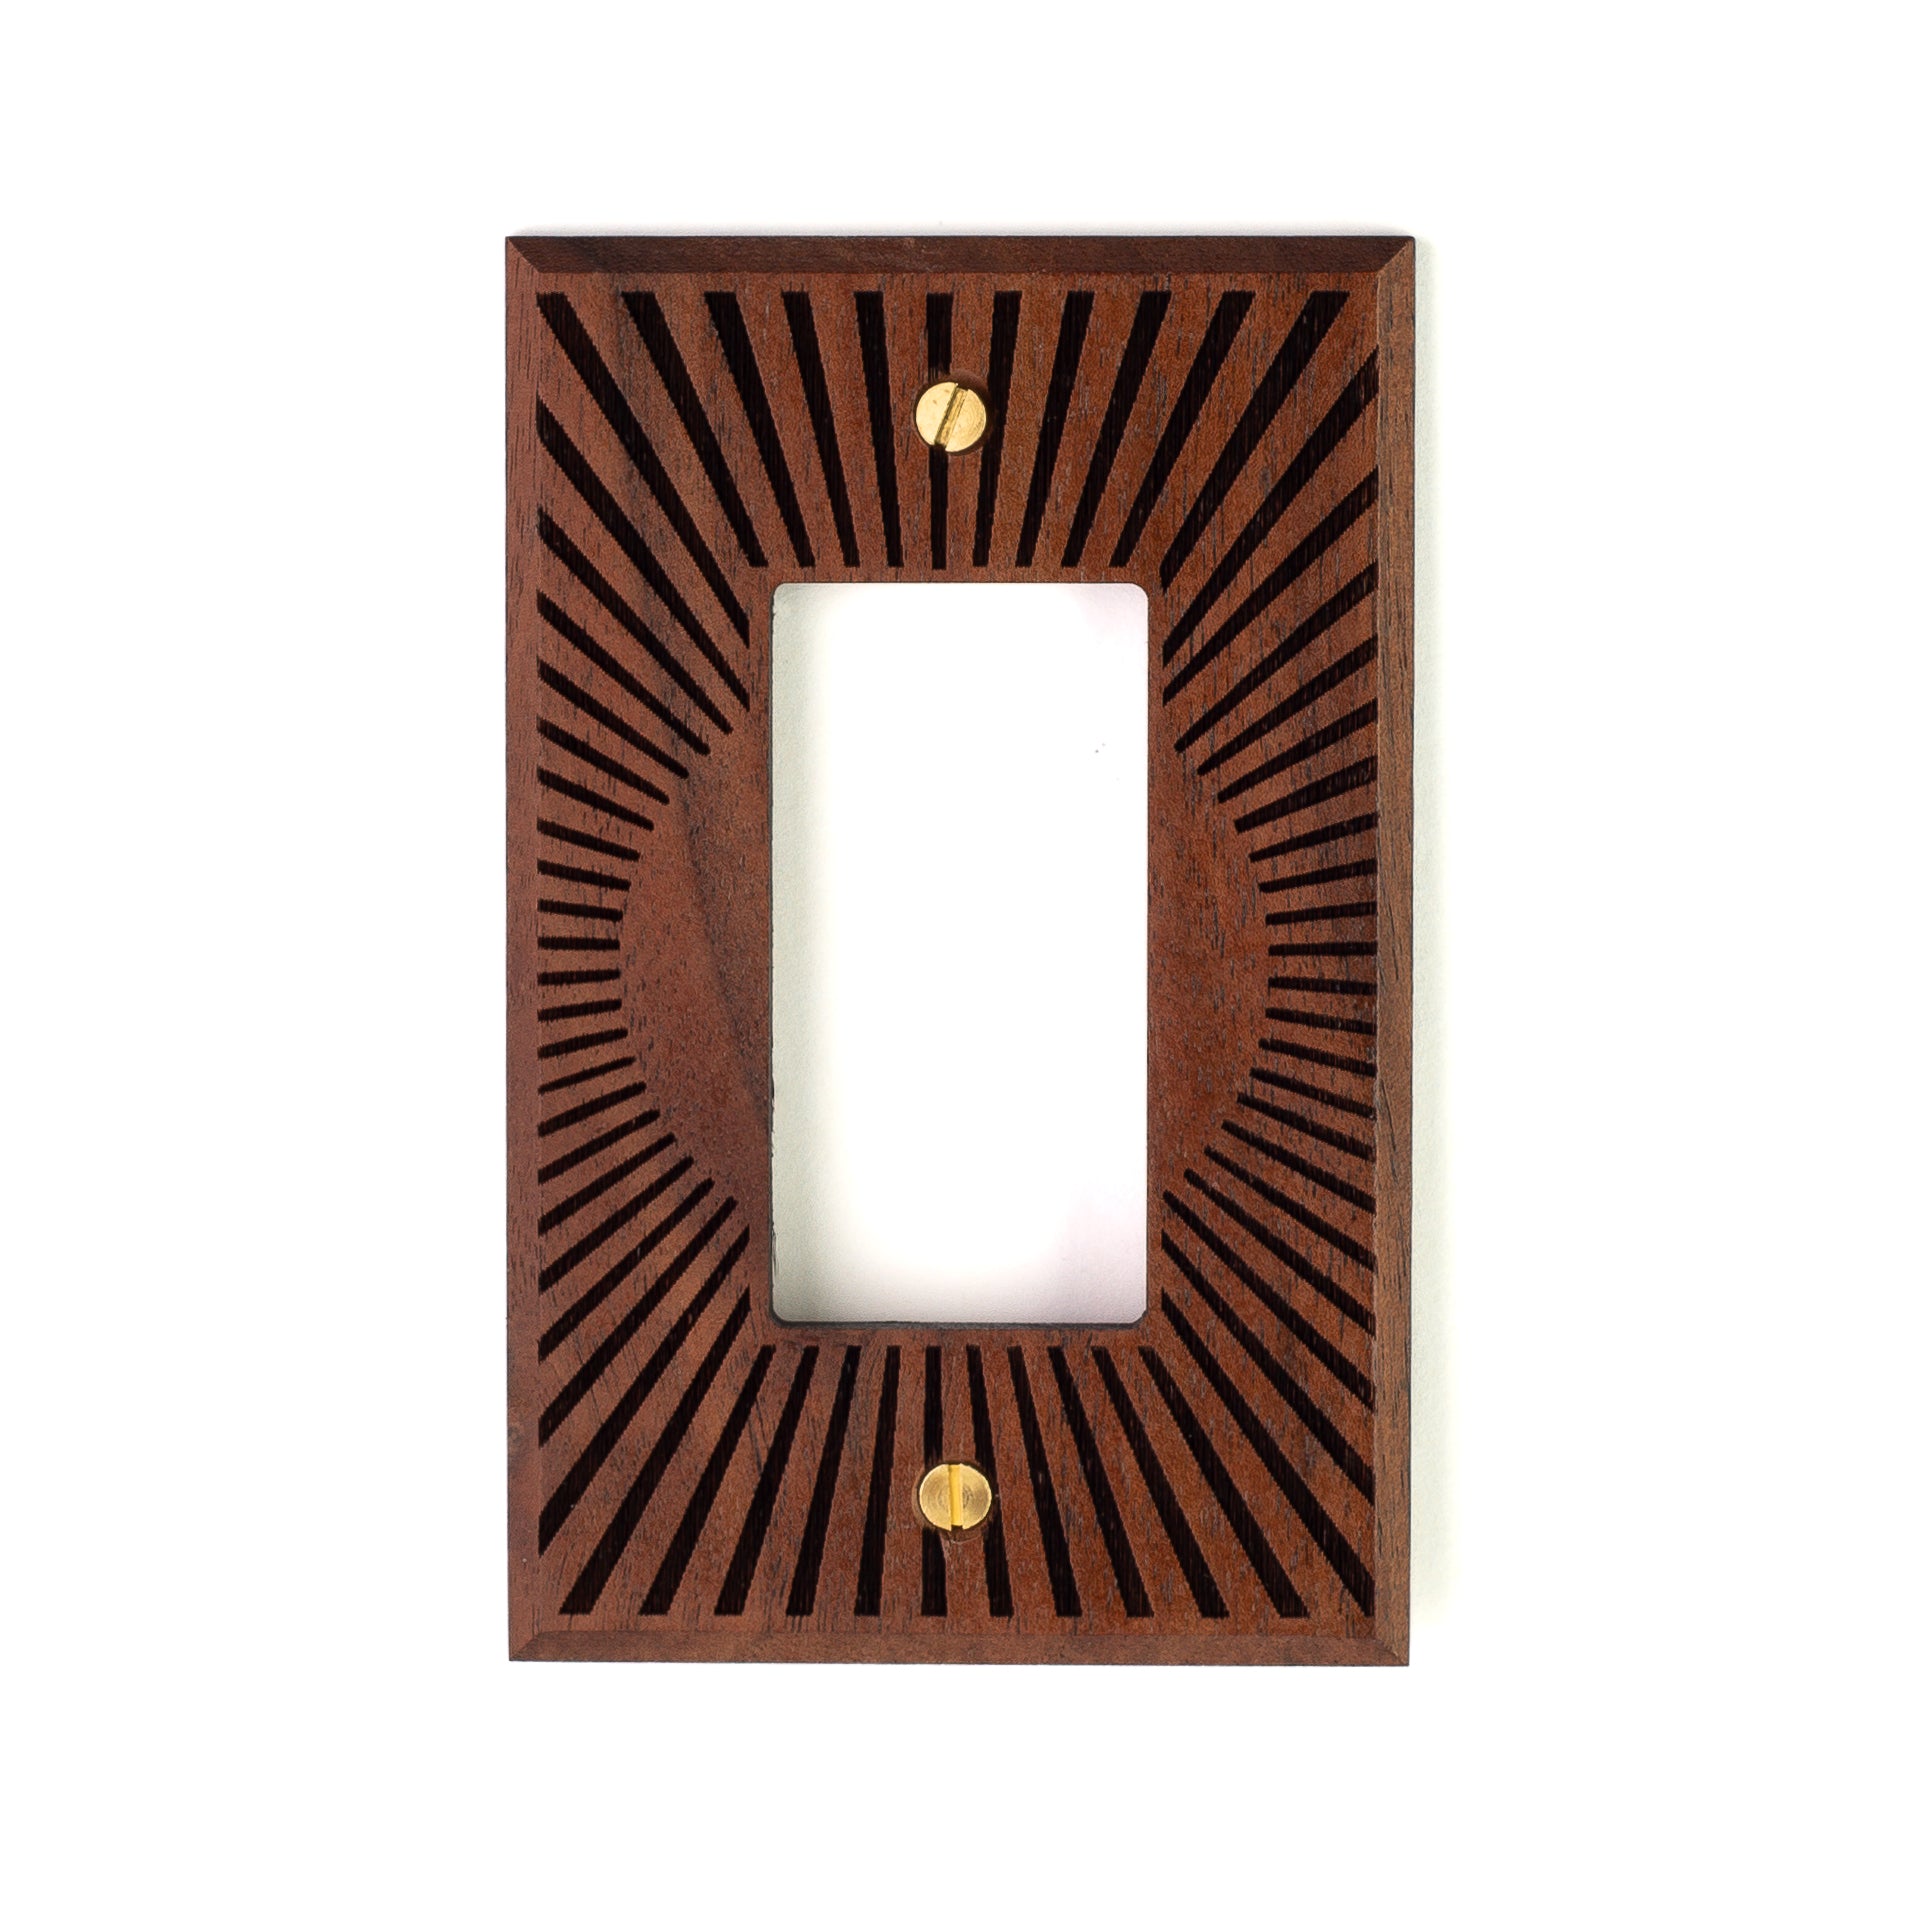 Walnut Light Switch Plate Rocker Decora, Toggle and Outlet Plate Covers